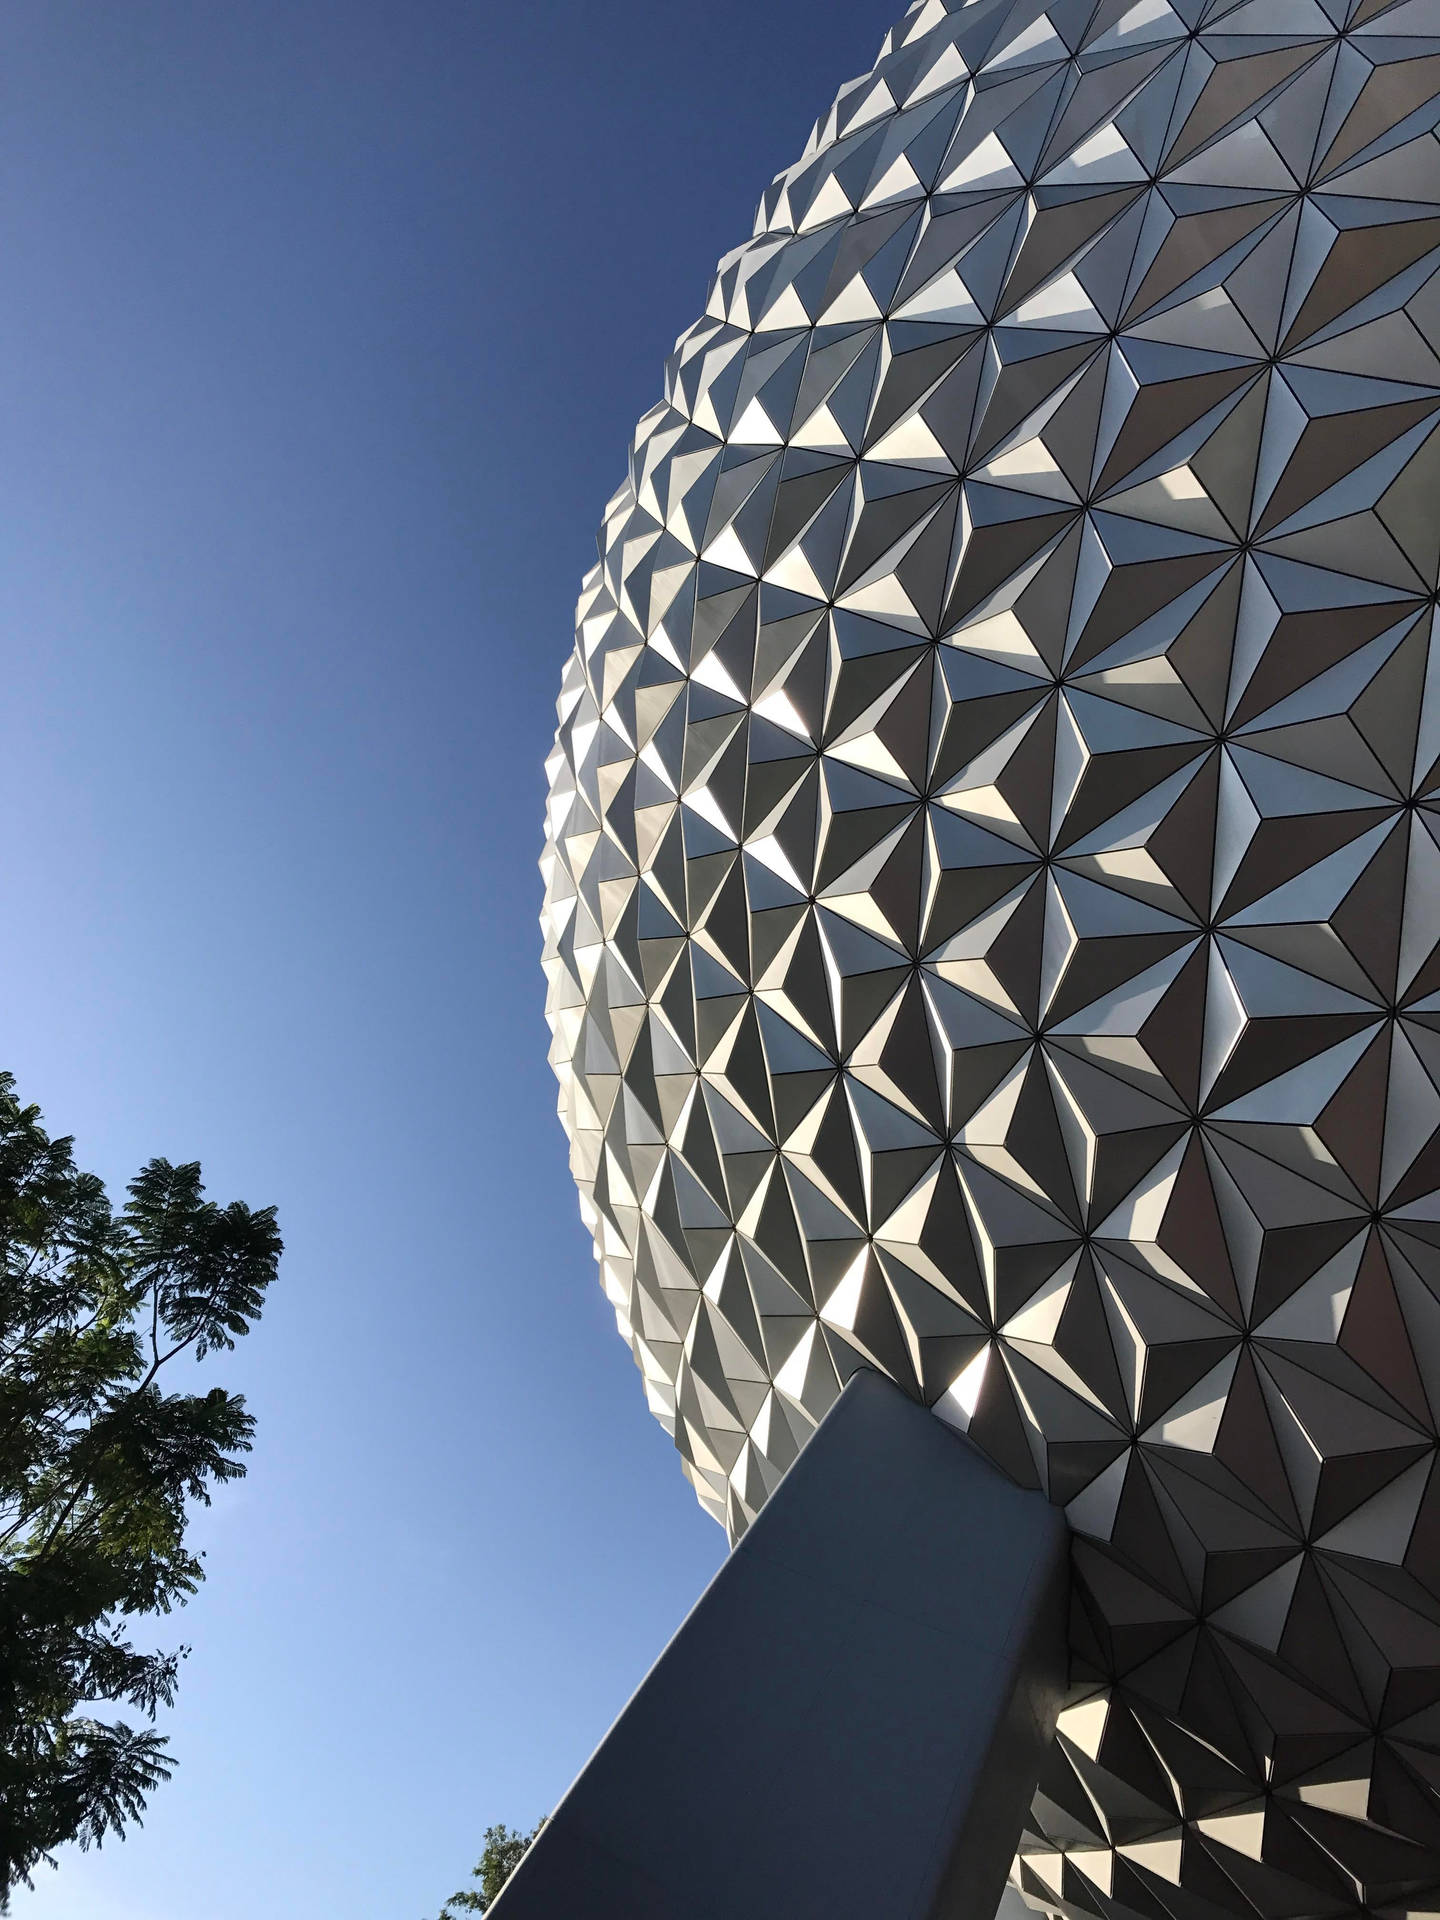 "Iconic Epcot Globe Captured from Below" Wallpaper